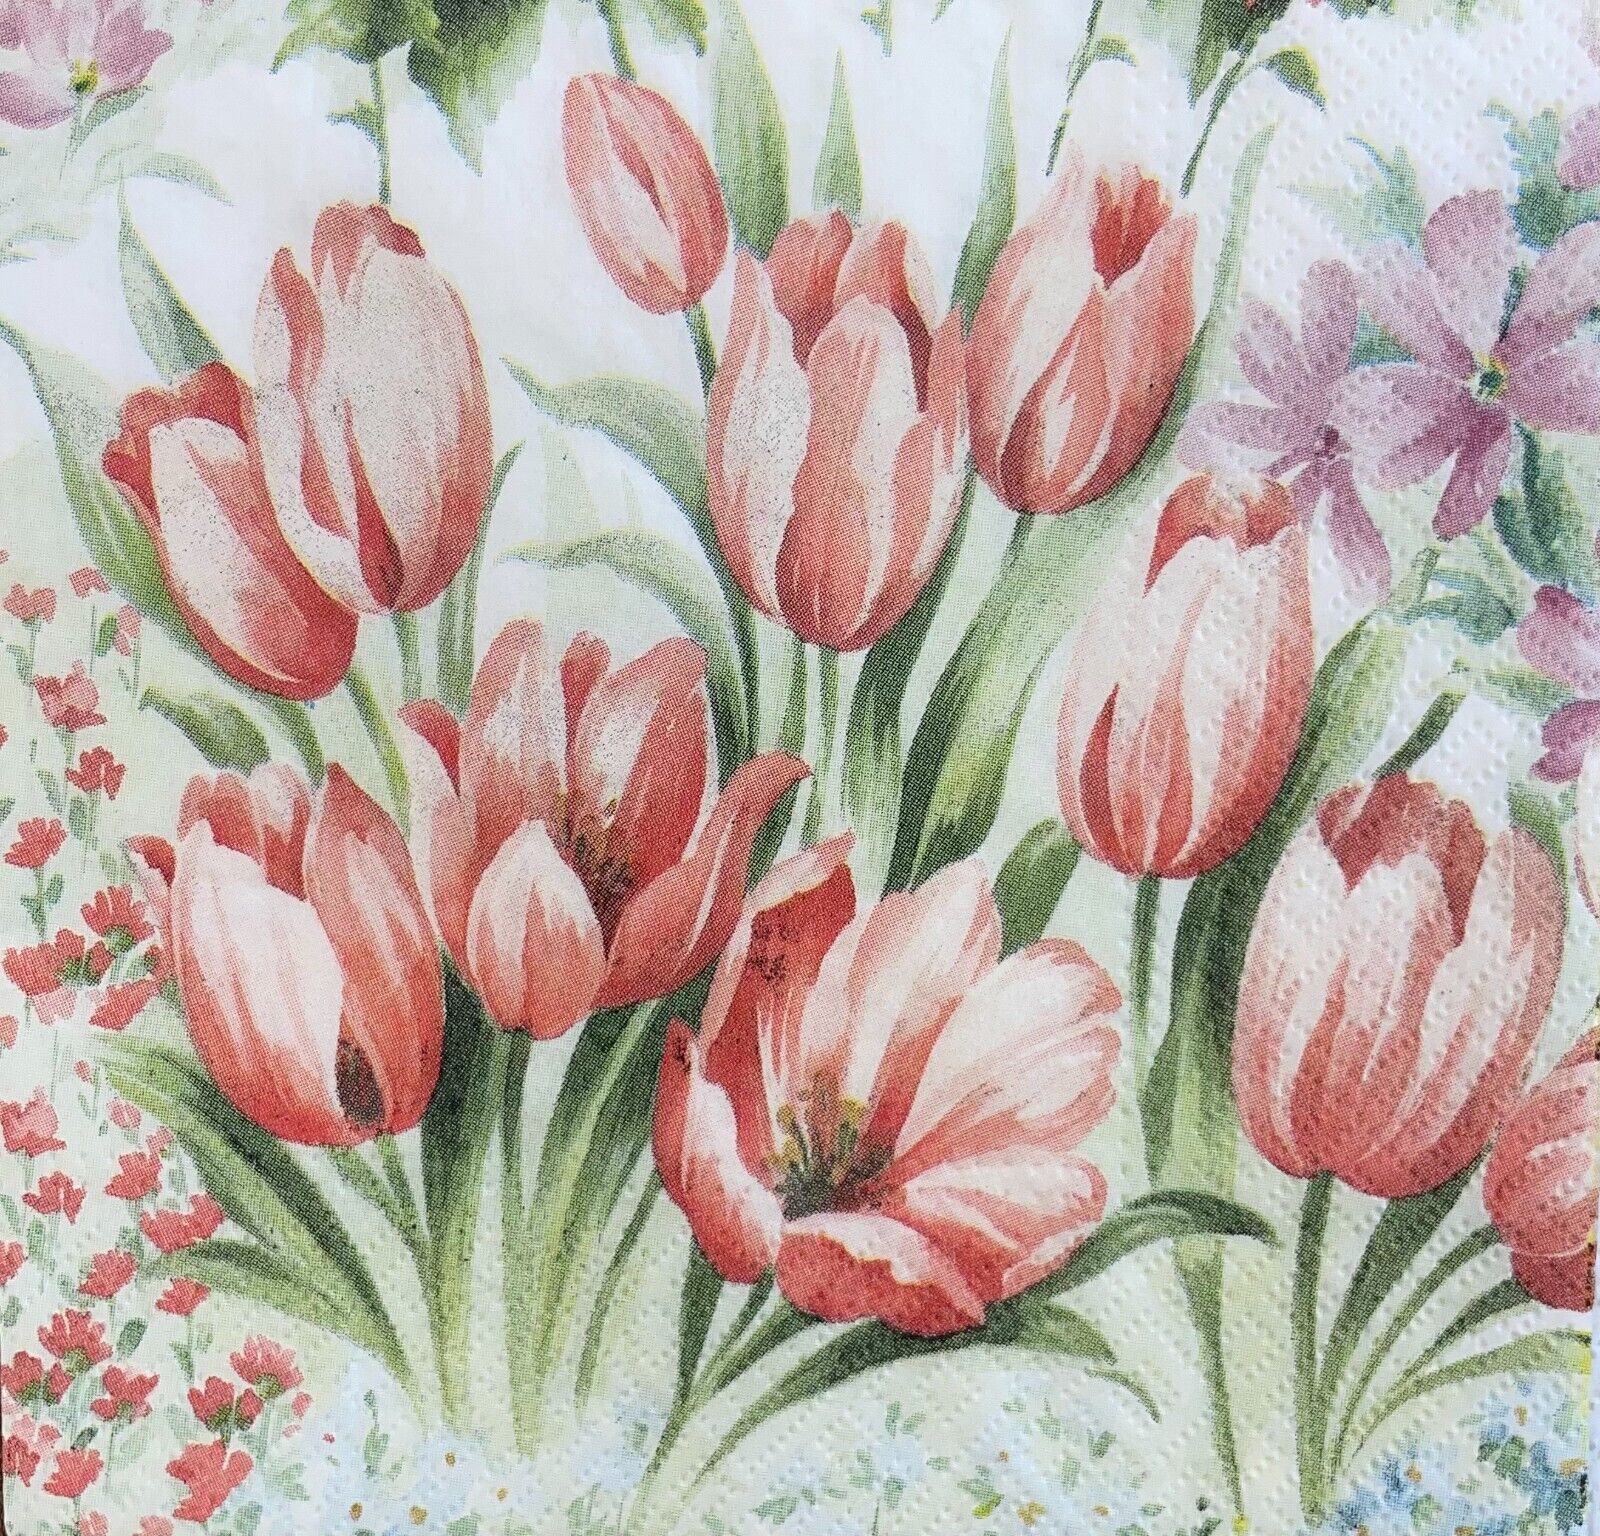  Paper Luncheon Decoupage Napkins European Design Red Tulips Pack of 20 pcs